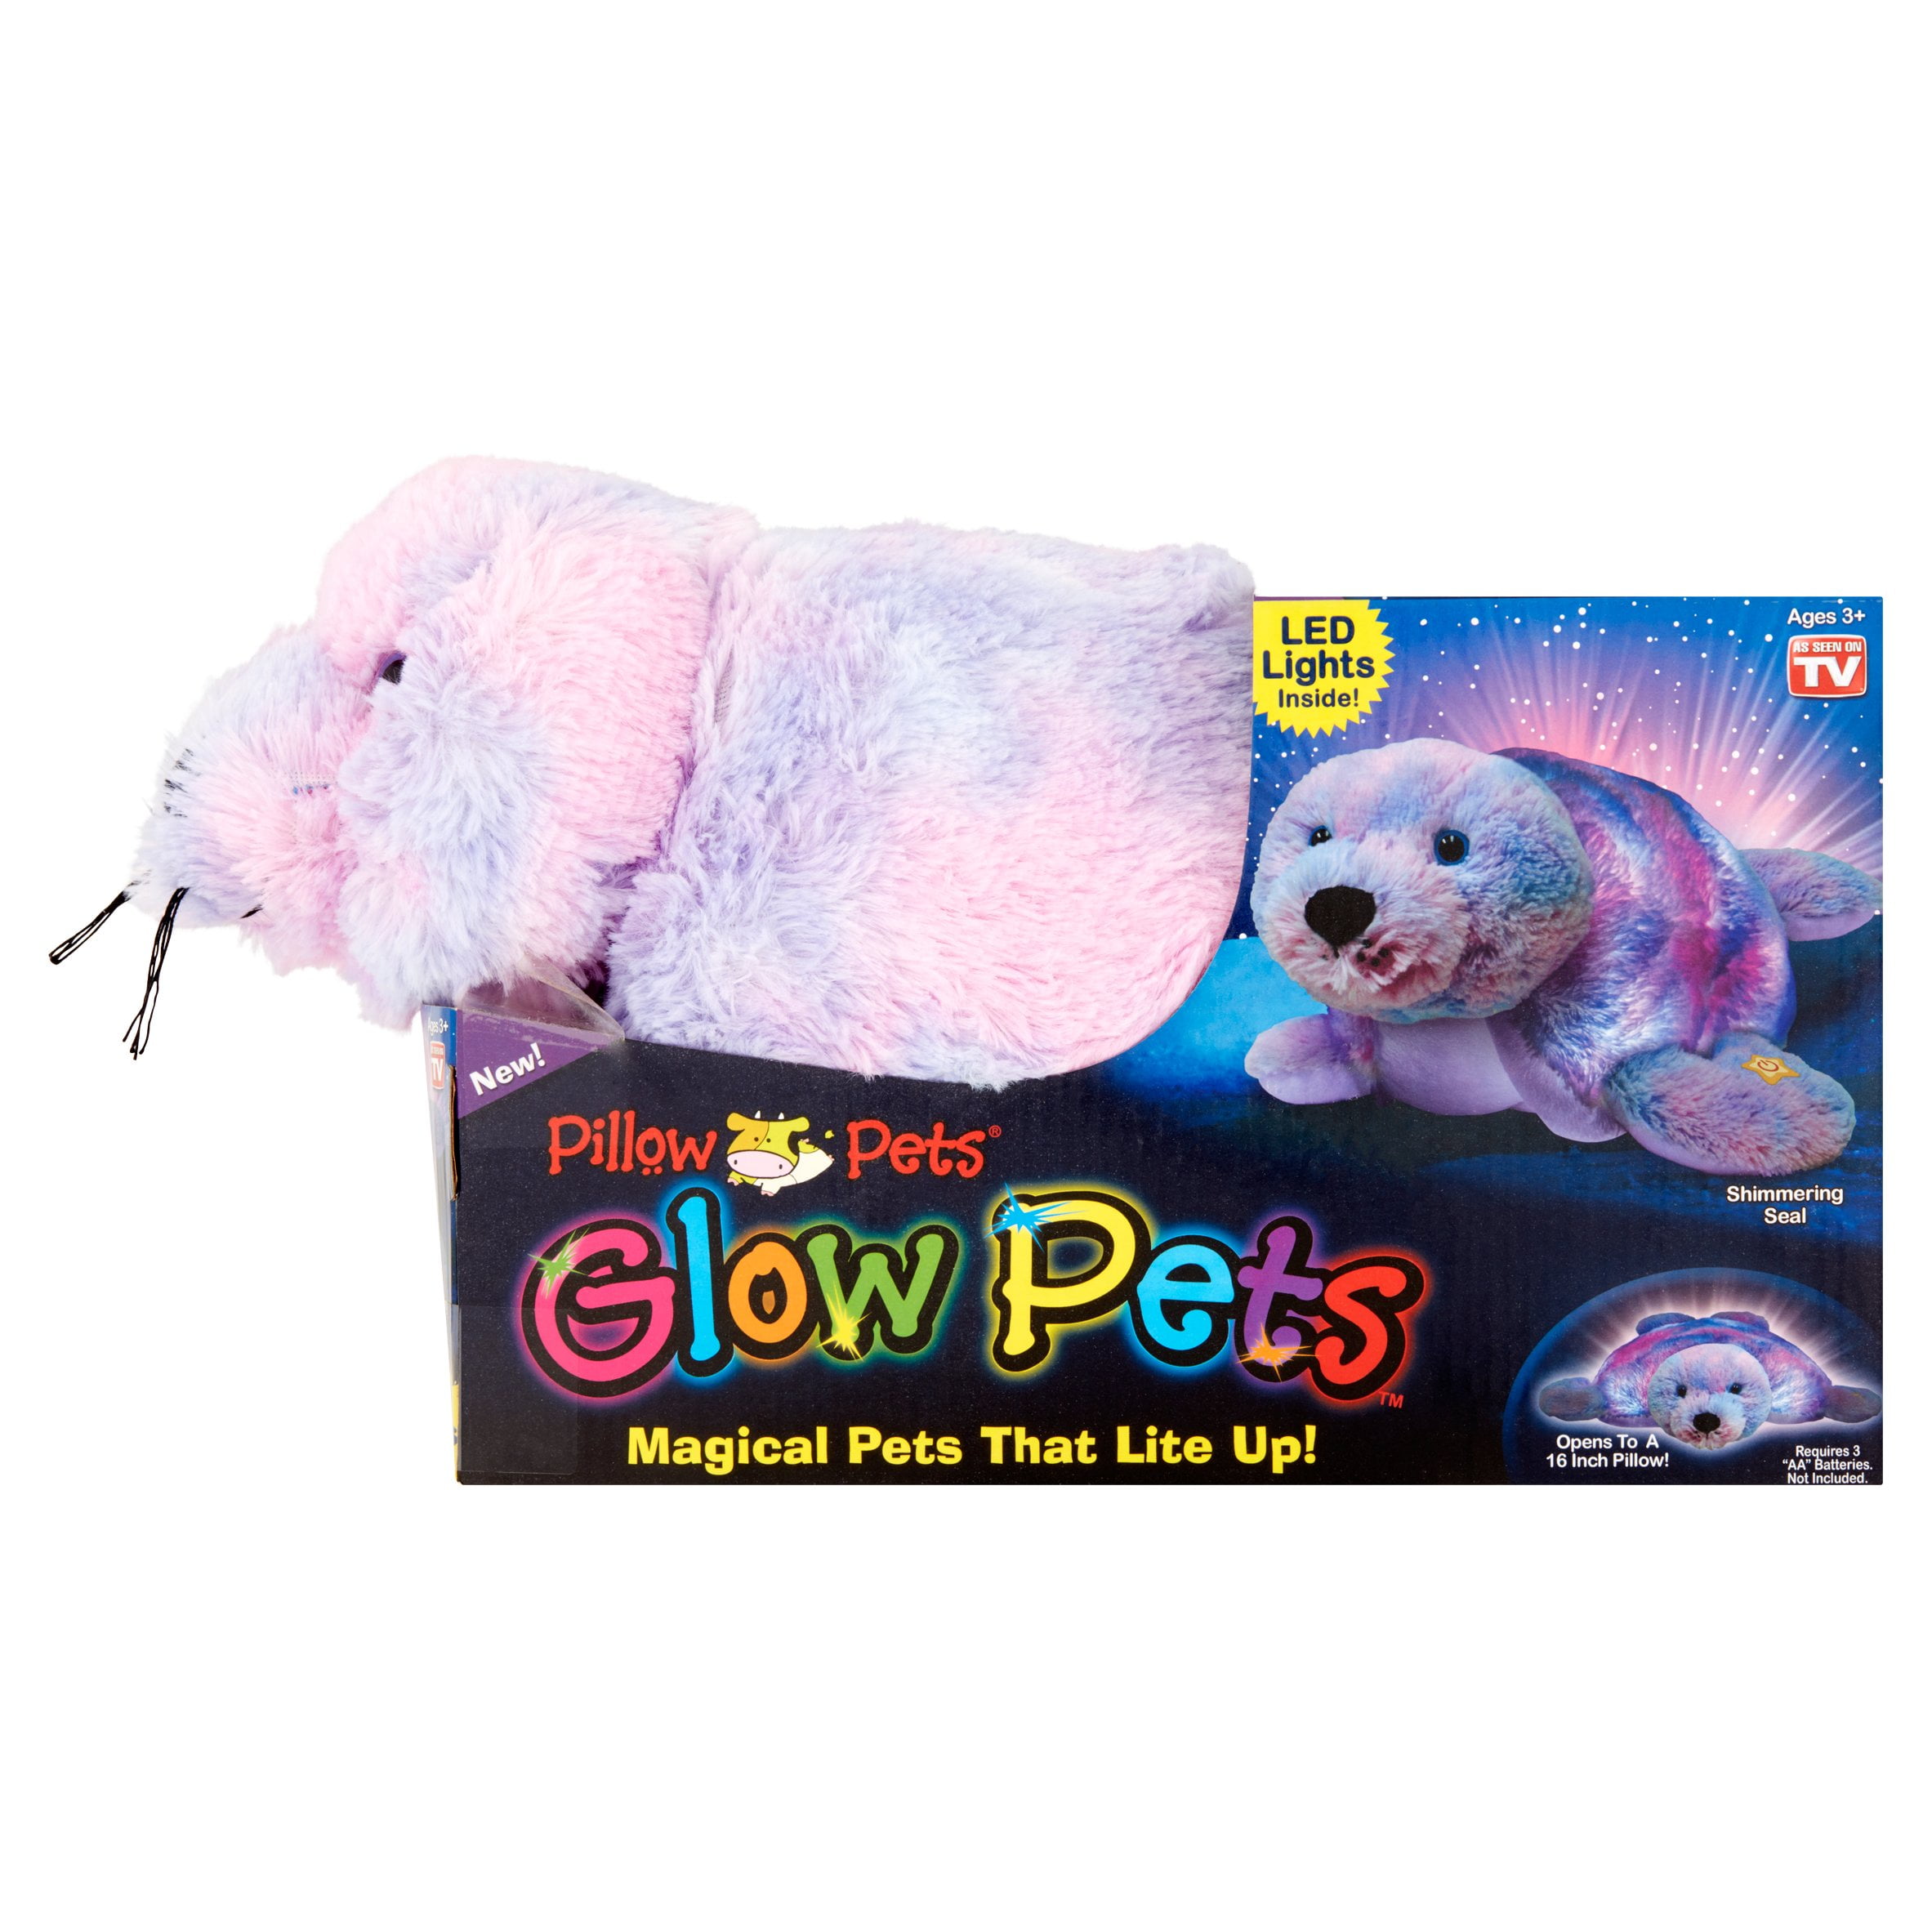 As seen on TV NEW Pillow Pets GLOW PETS Ages 3+ Shimmering Seal 